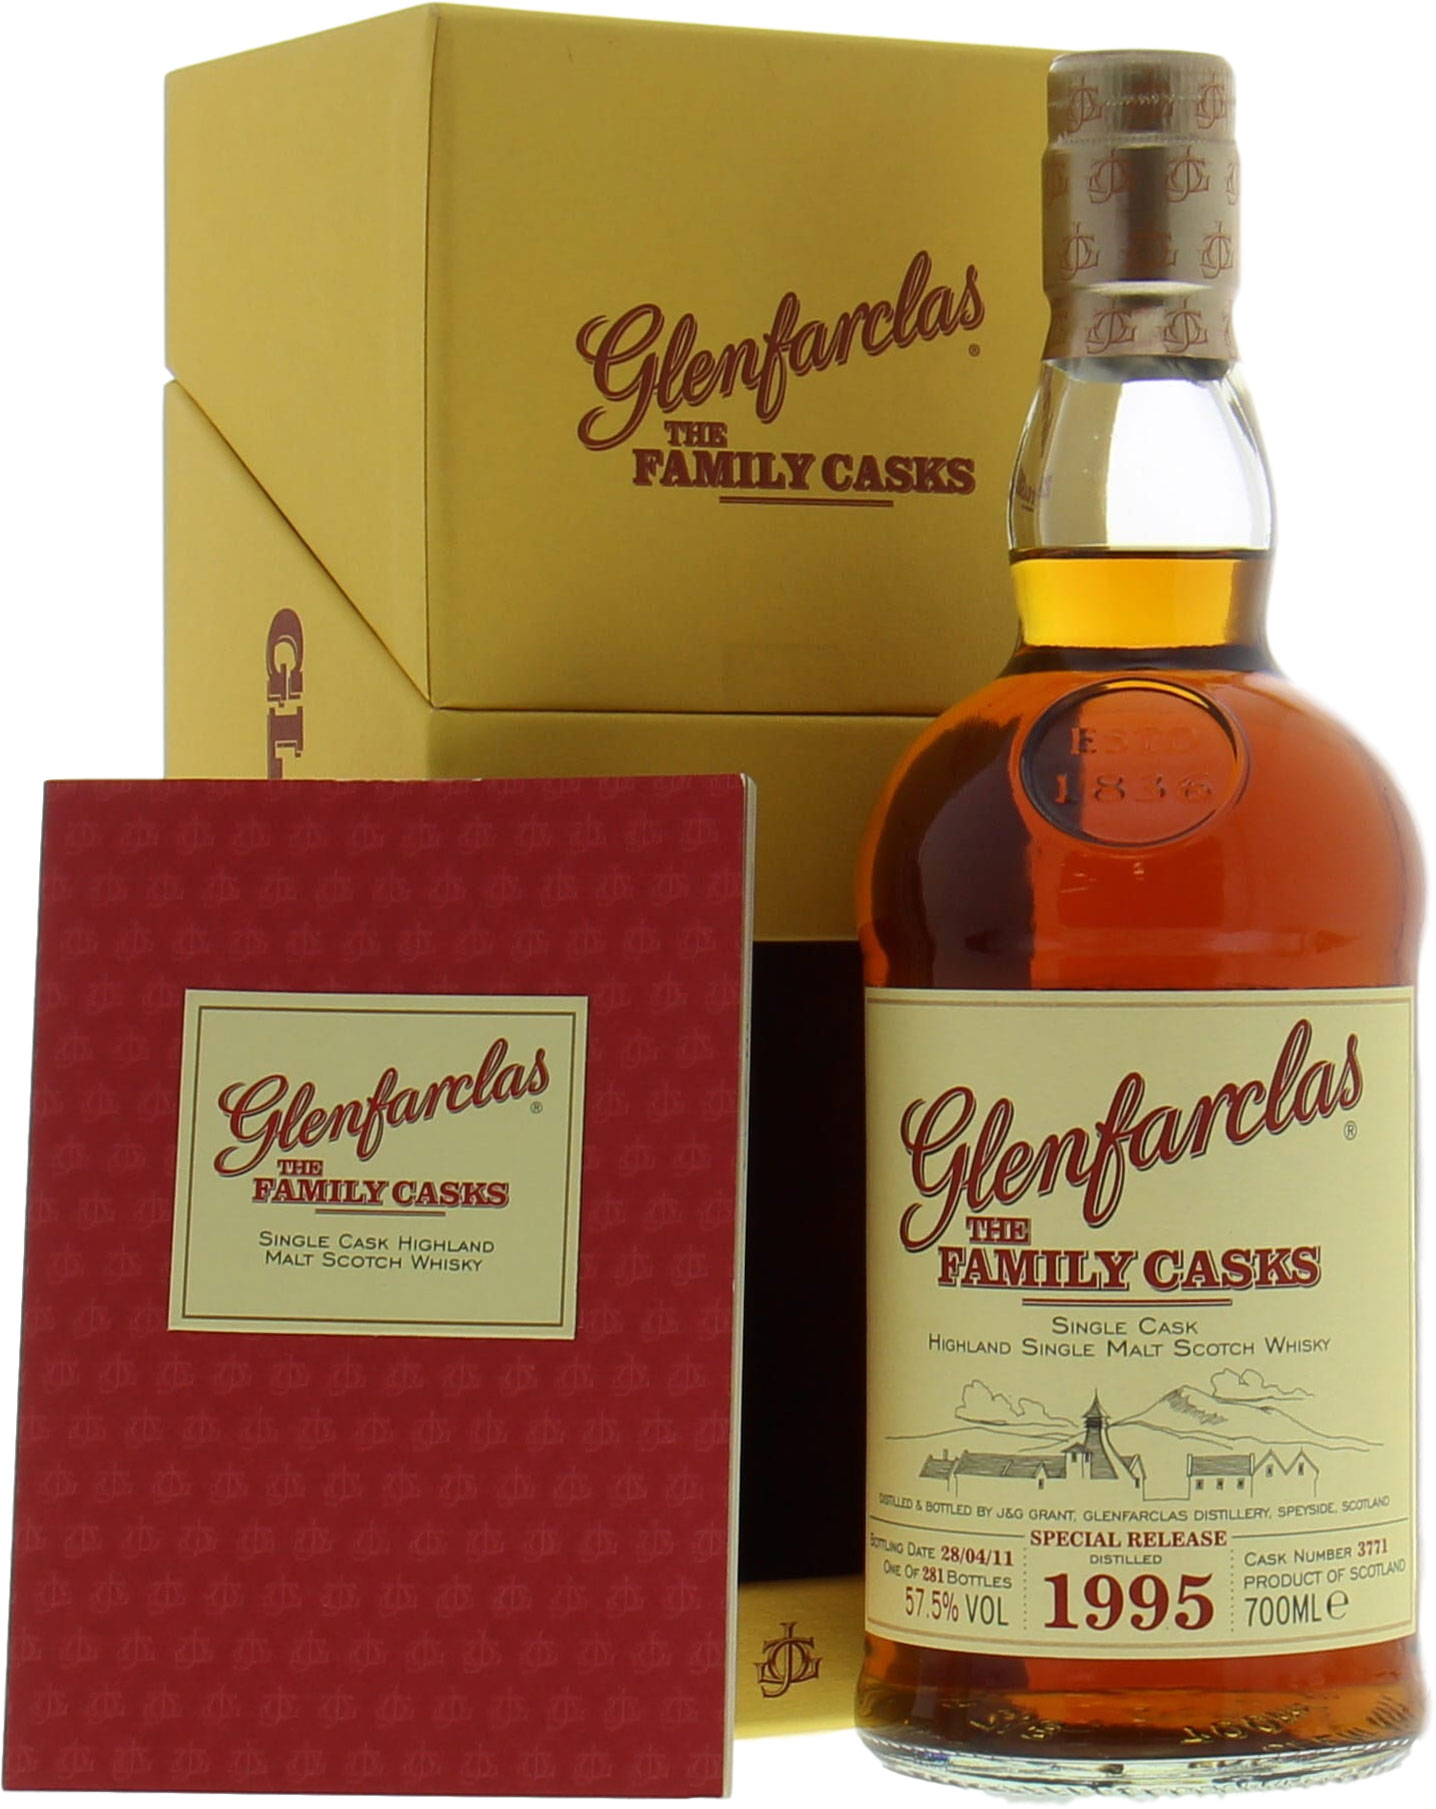 Glenfarclas - 15 years Old The Family Casks for Usquebaugh Society Cask 3771 57.5% 1995 In Original Container